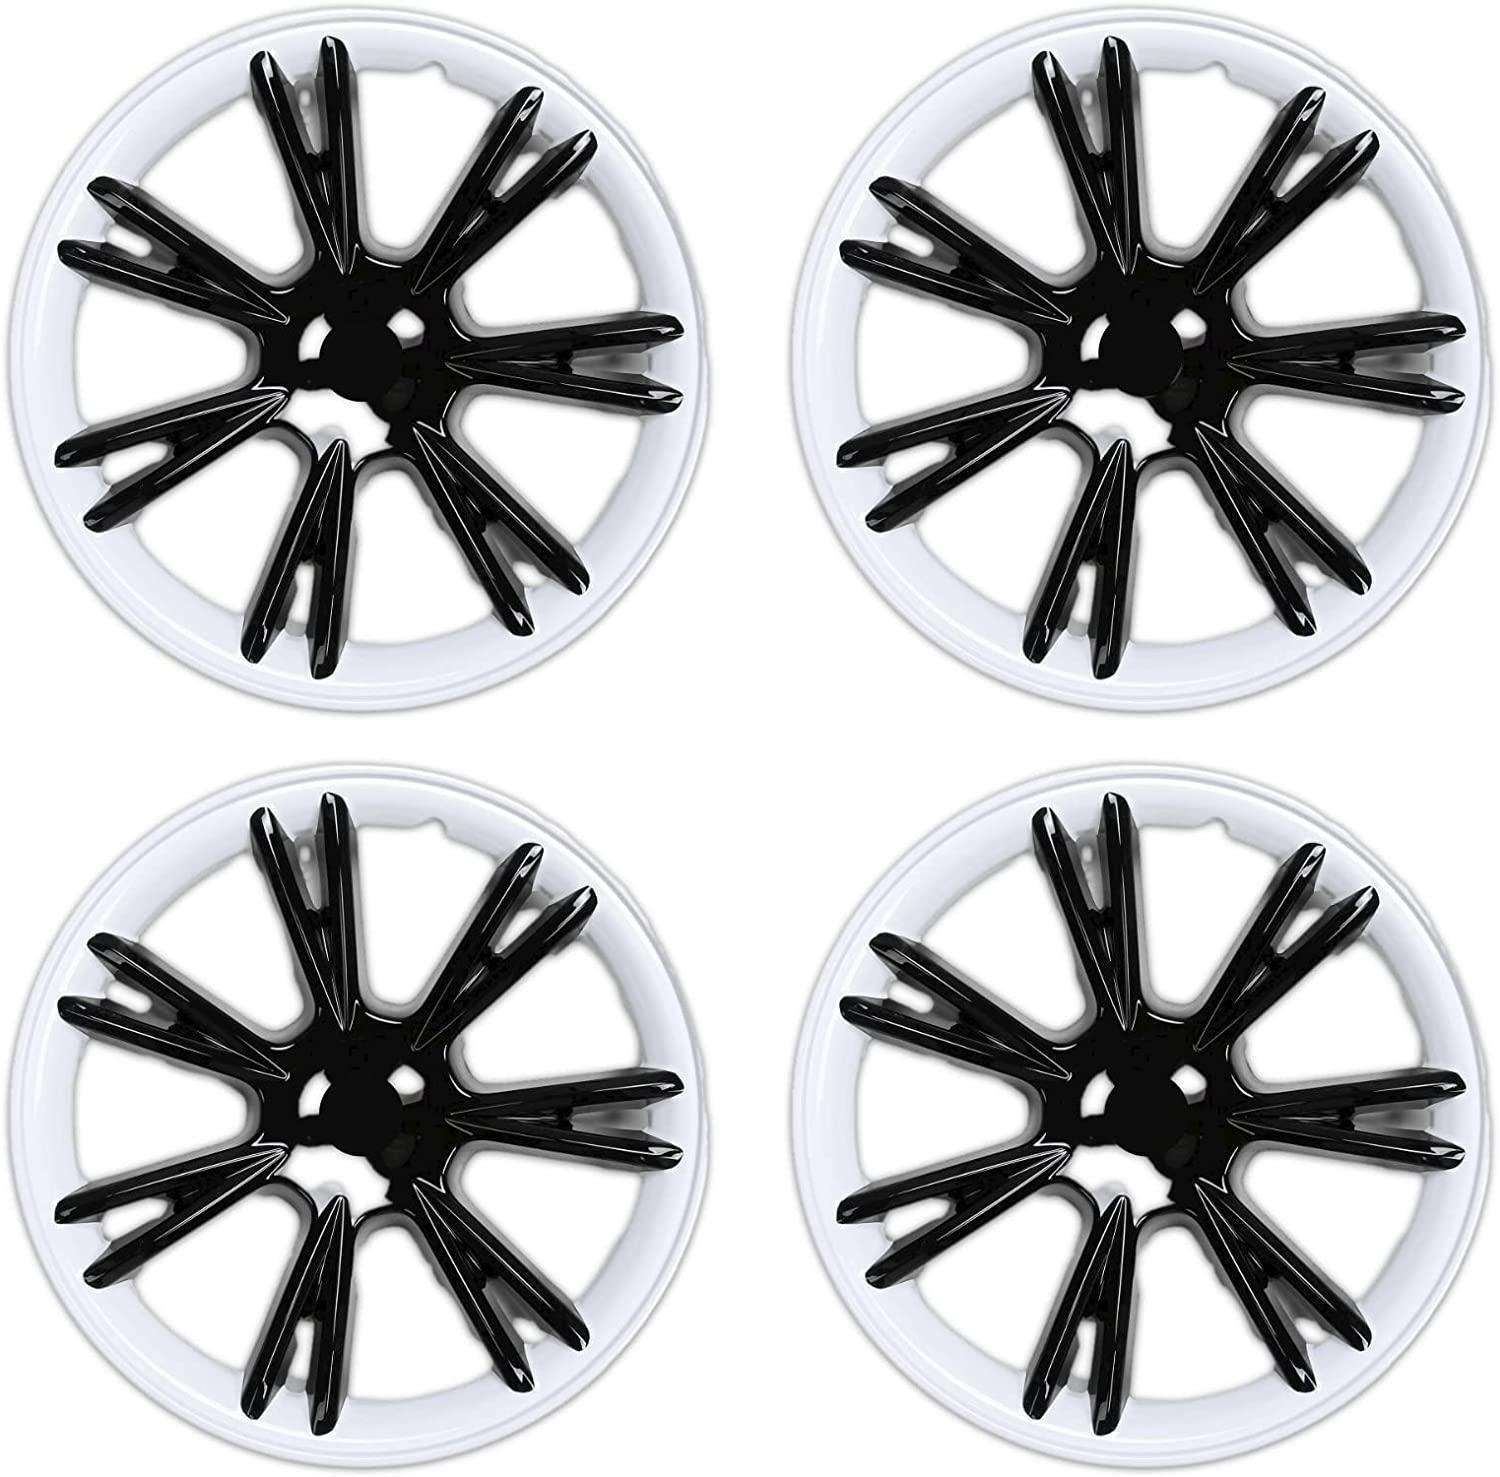 19‘’ Wheel Covers Black and White for Tesla Model Y -TESDADDY